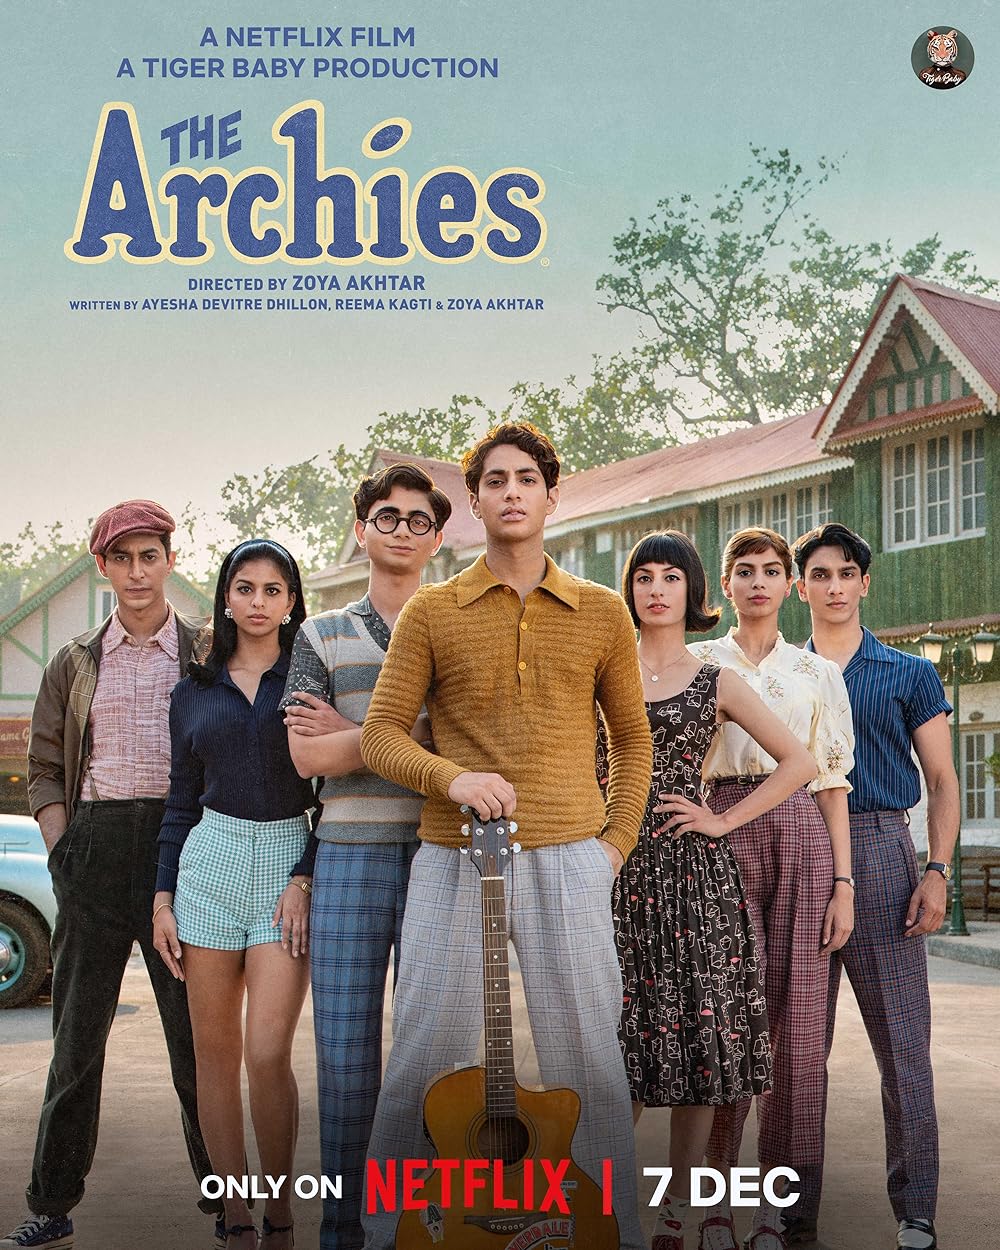 The Archies (December 7) - Streaming on NetflixThe Archies, helmed by Zoya Akhtar, is set in 1960s India, based on the original comics. The film follows the classic characters of Archie, Betty, Veronica, Jughead, and others as they navigate adolescence, romance, and the preservation of a beloved park in Riverdale.